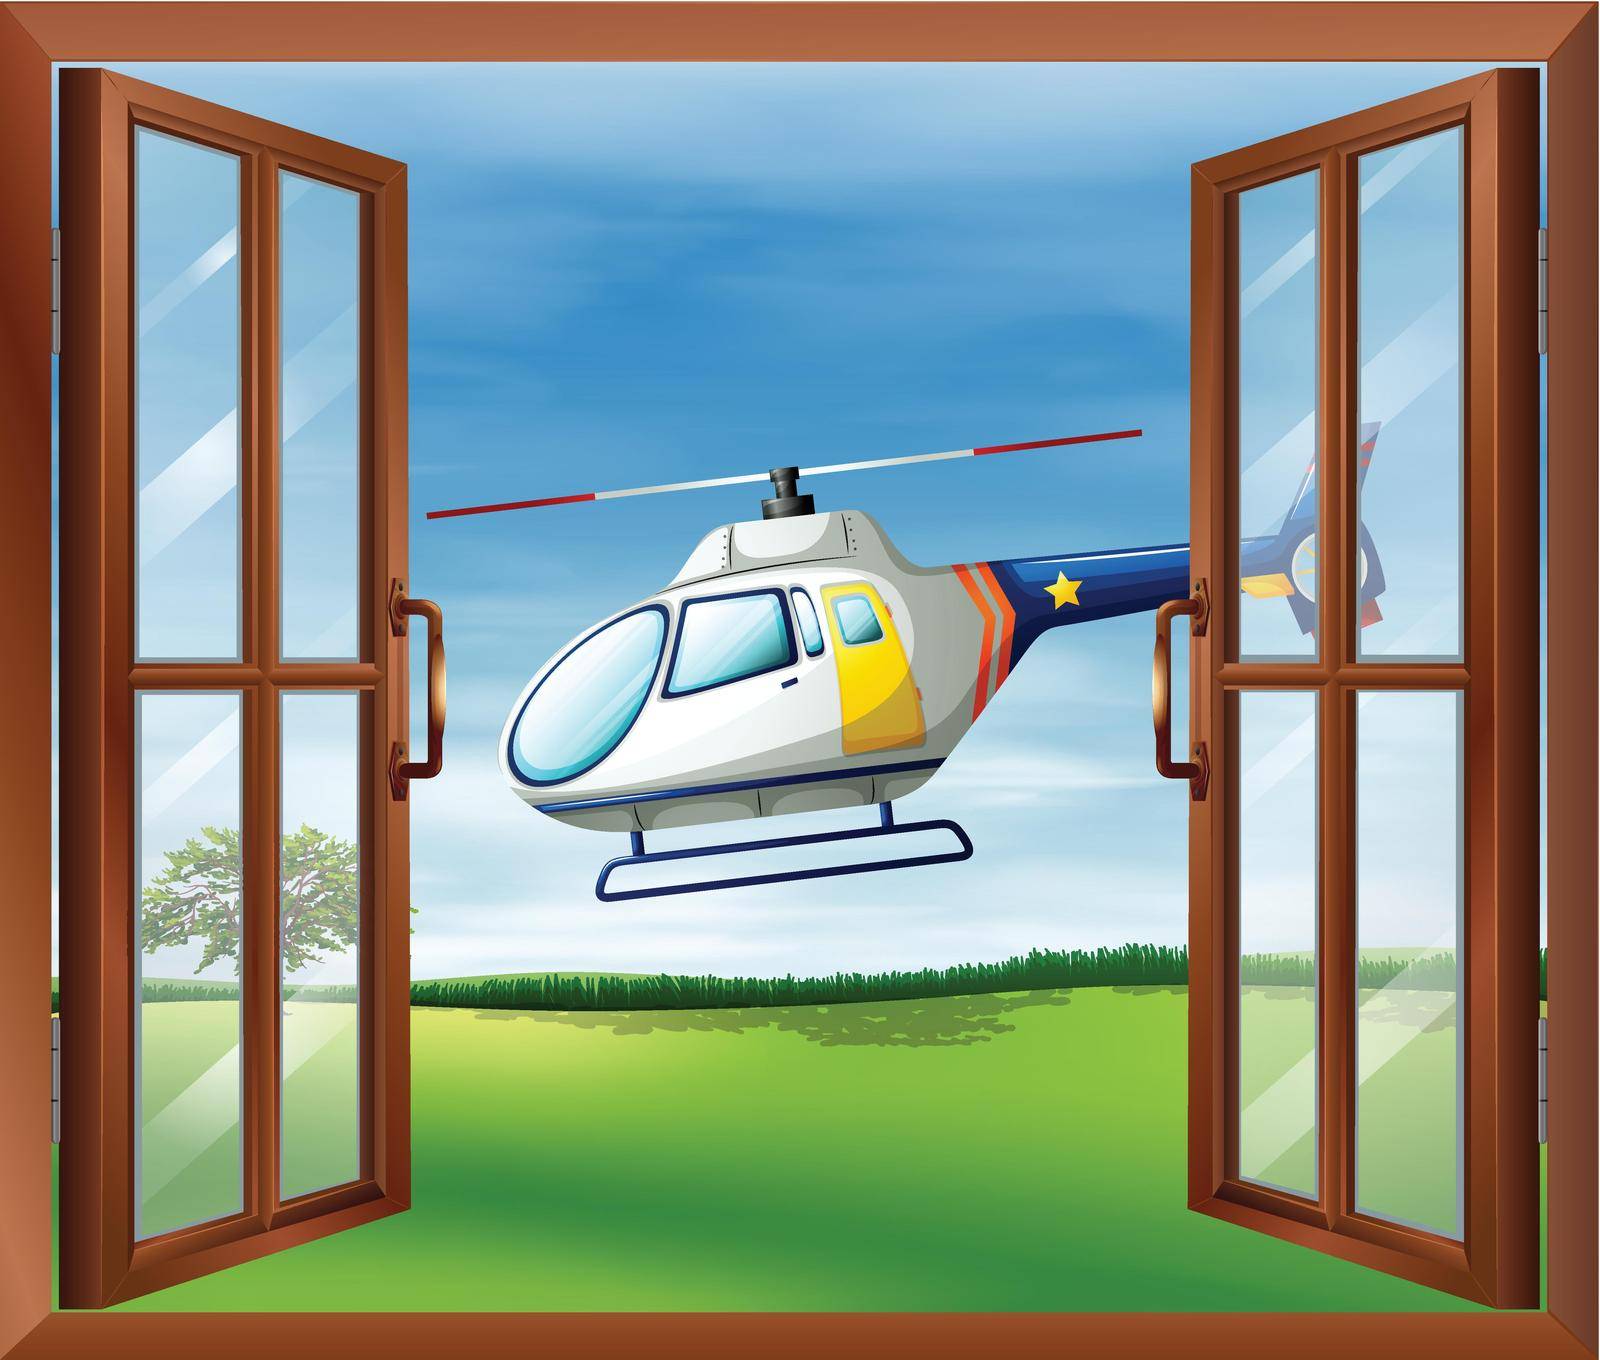 A helicopter outside the window by iimages